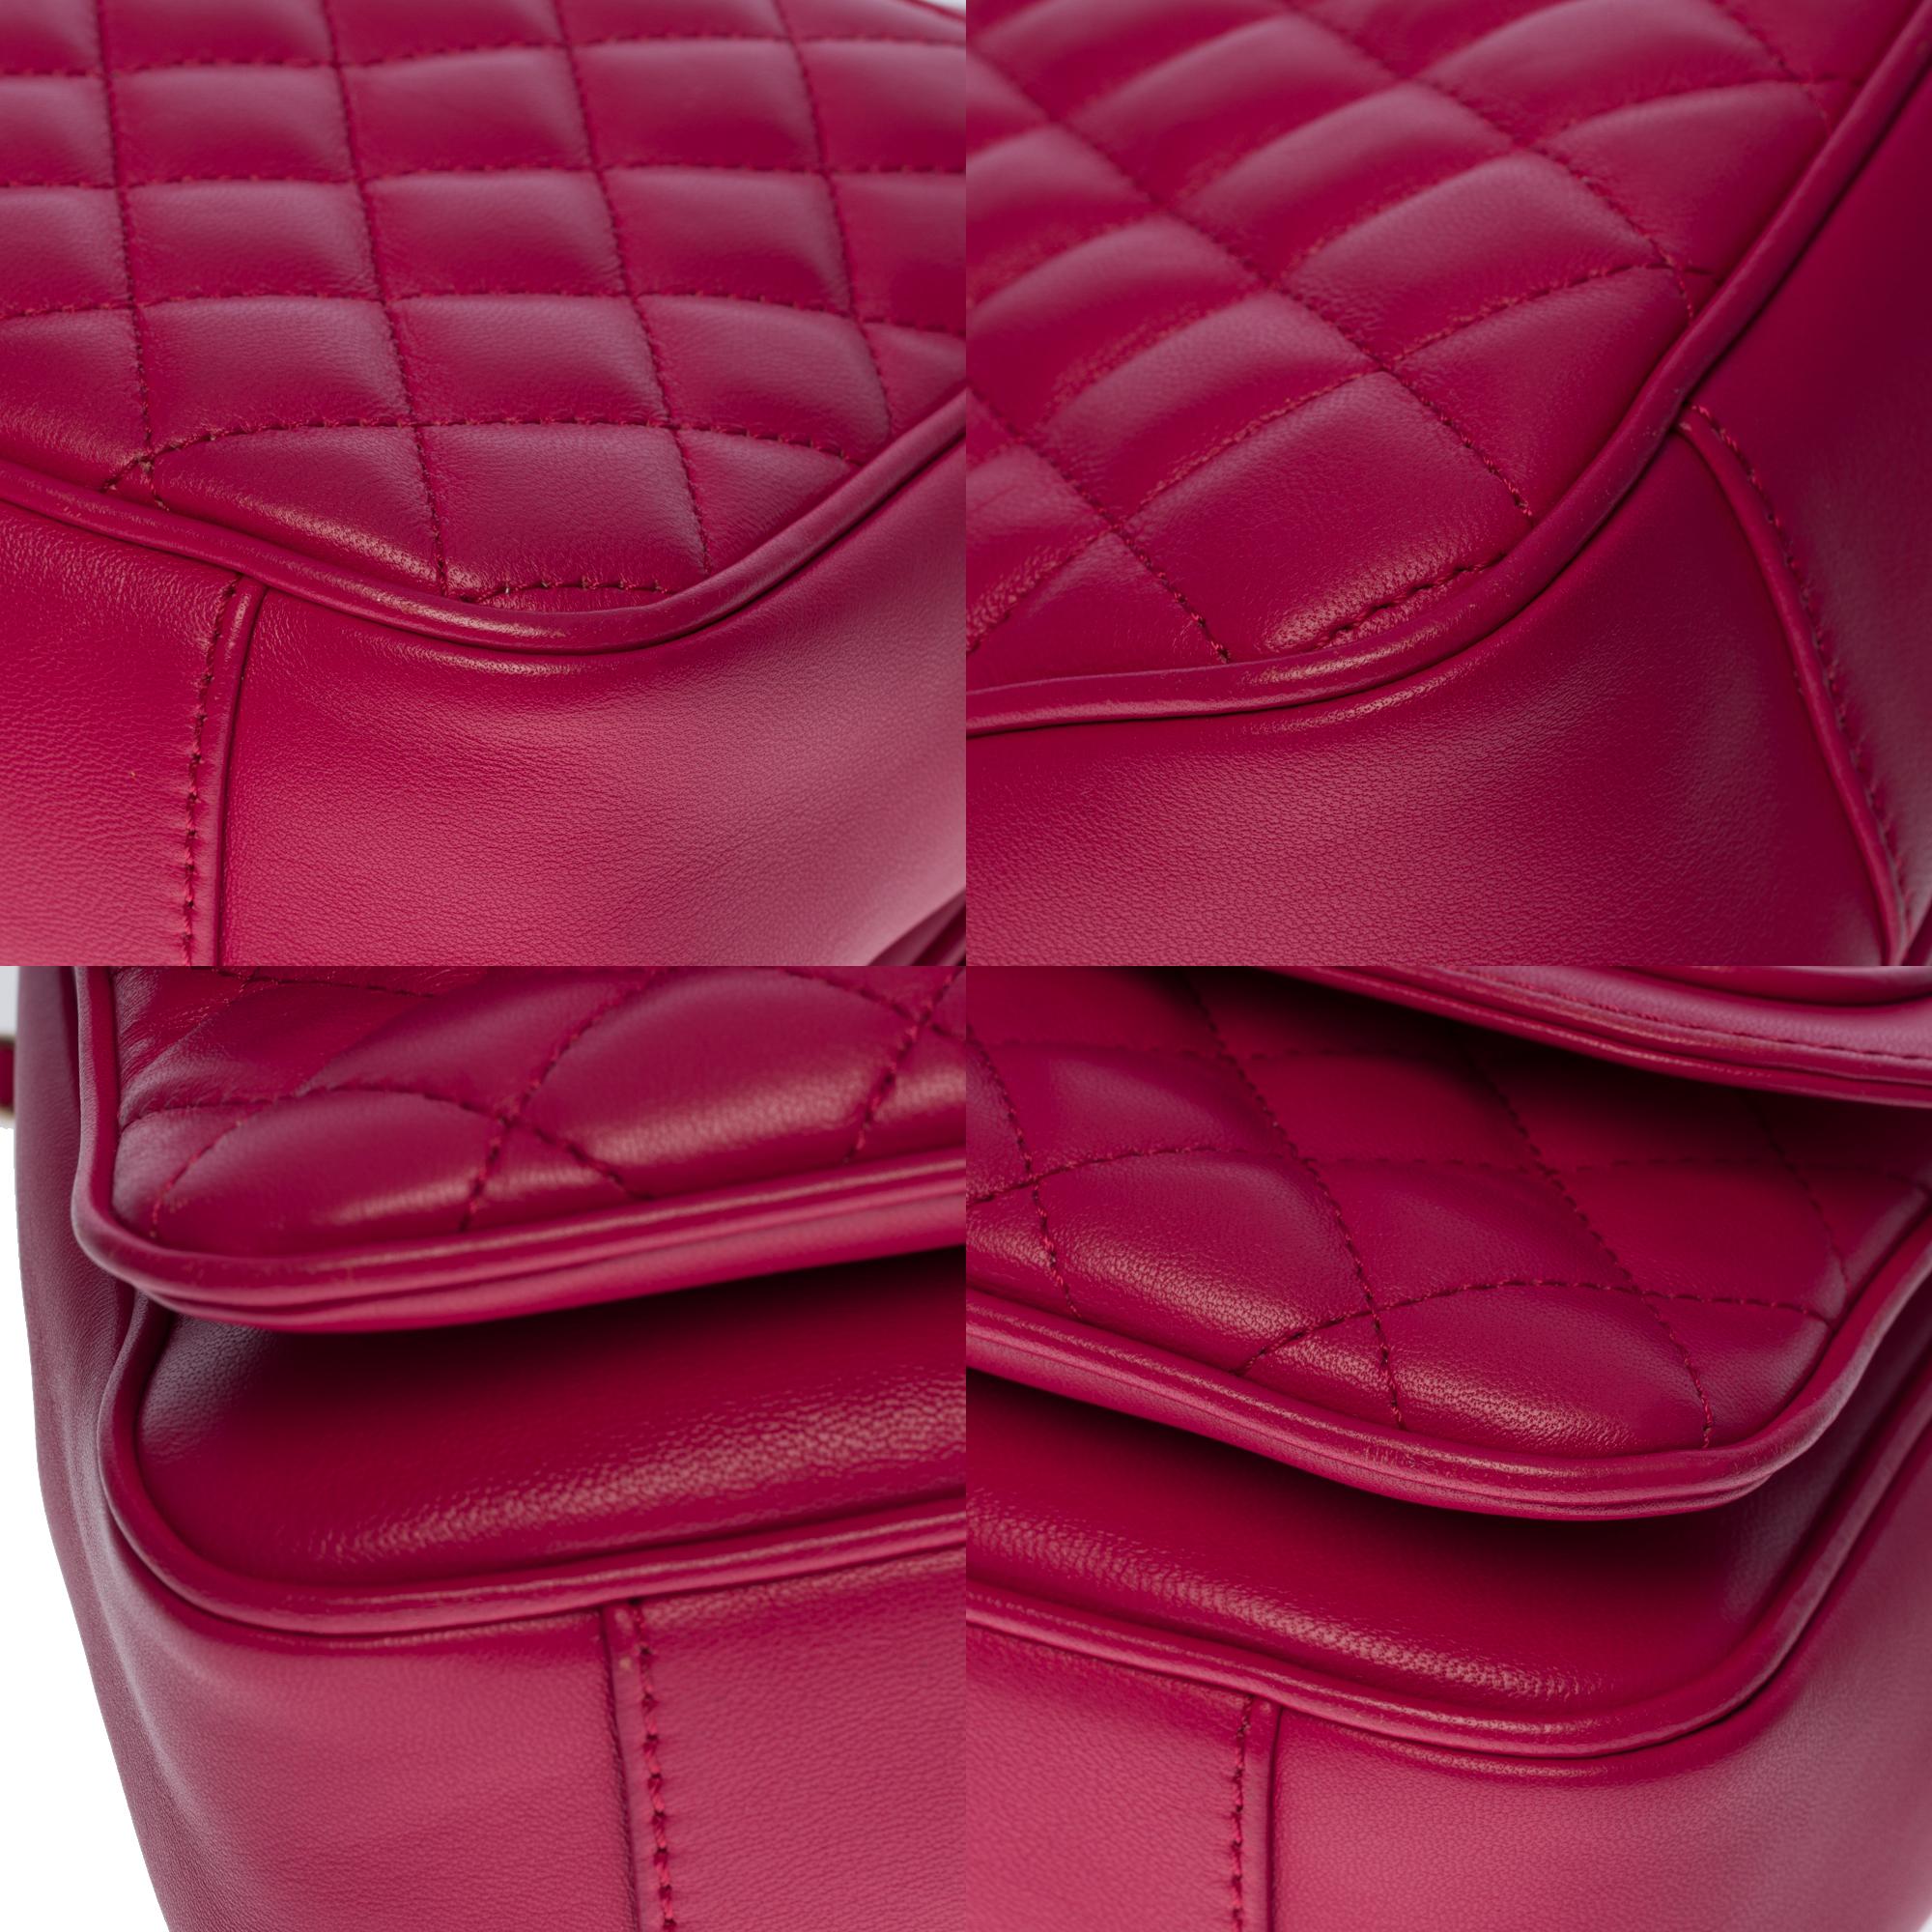 Chanel Timeless/Classic double flap shoulder bag in pink quilted lambskin, CHW 5